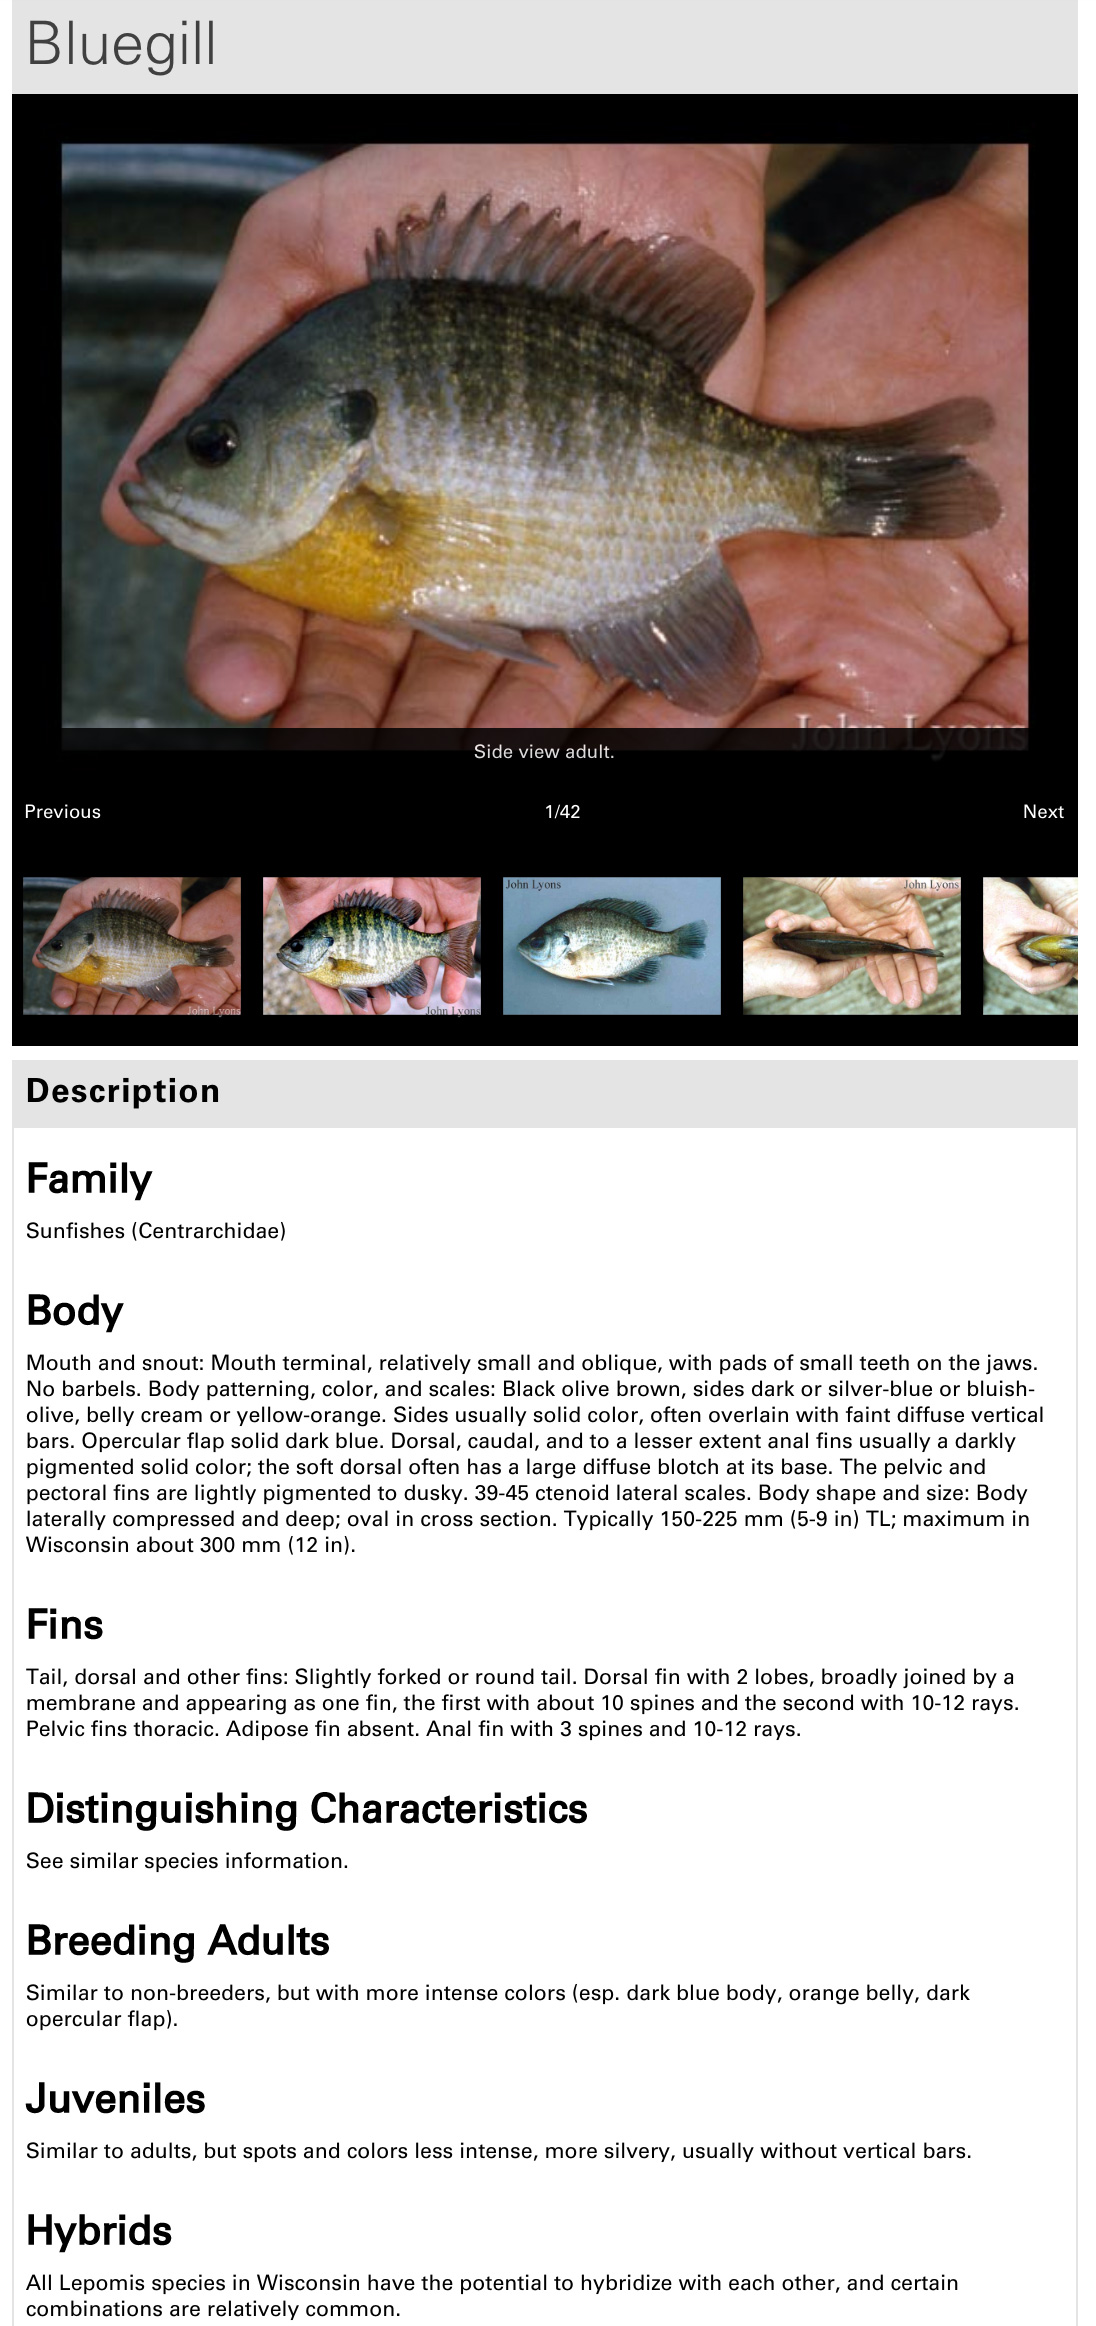 a screenshot from a website showing a Bluegill fish and a lot of text about it